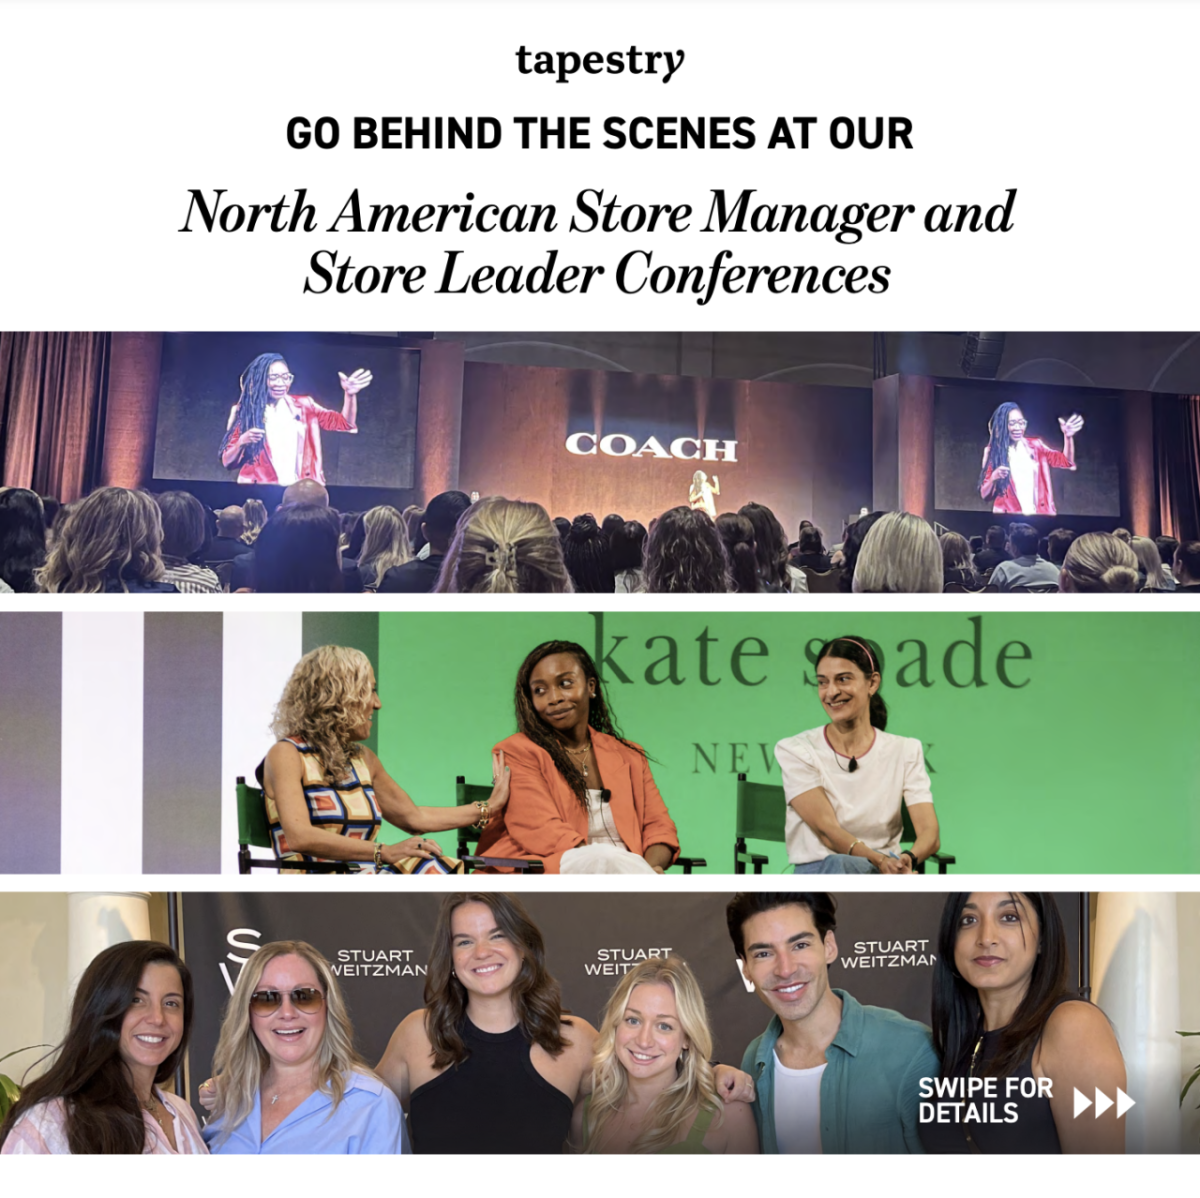 Three pictures from the North American Store Manager and Store Leader Conferences. 1) COACH presenting a talk on stage to a crowd of people. 2) Three people sat on chairs with a green 'kate spade' logo behind them. 3) group of people smiling against a backdrop with a range of logo's on